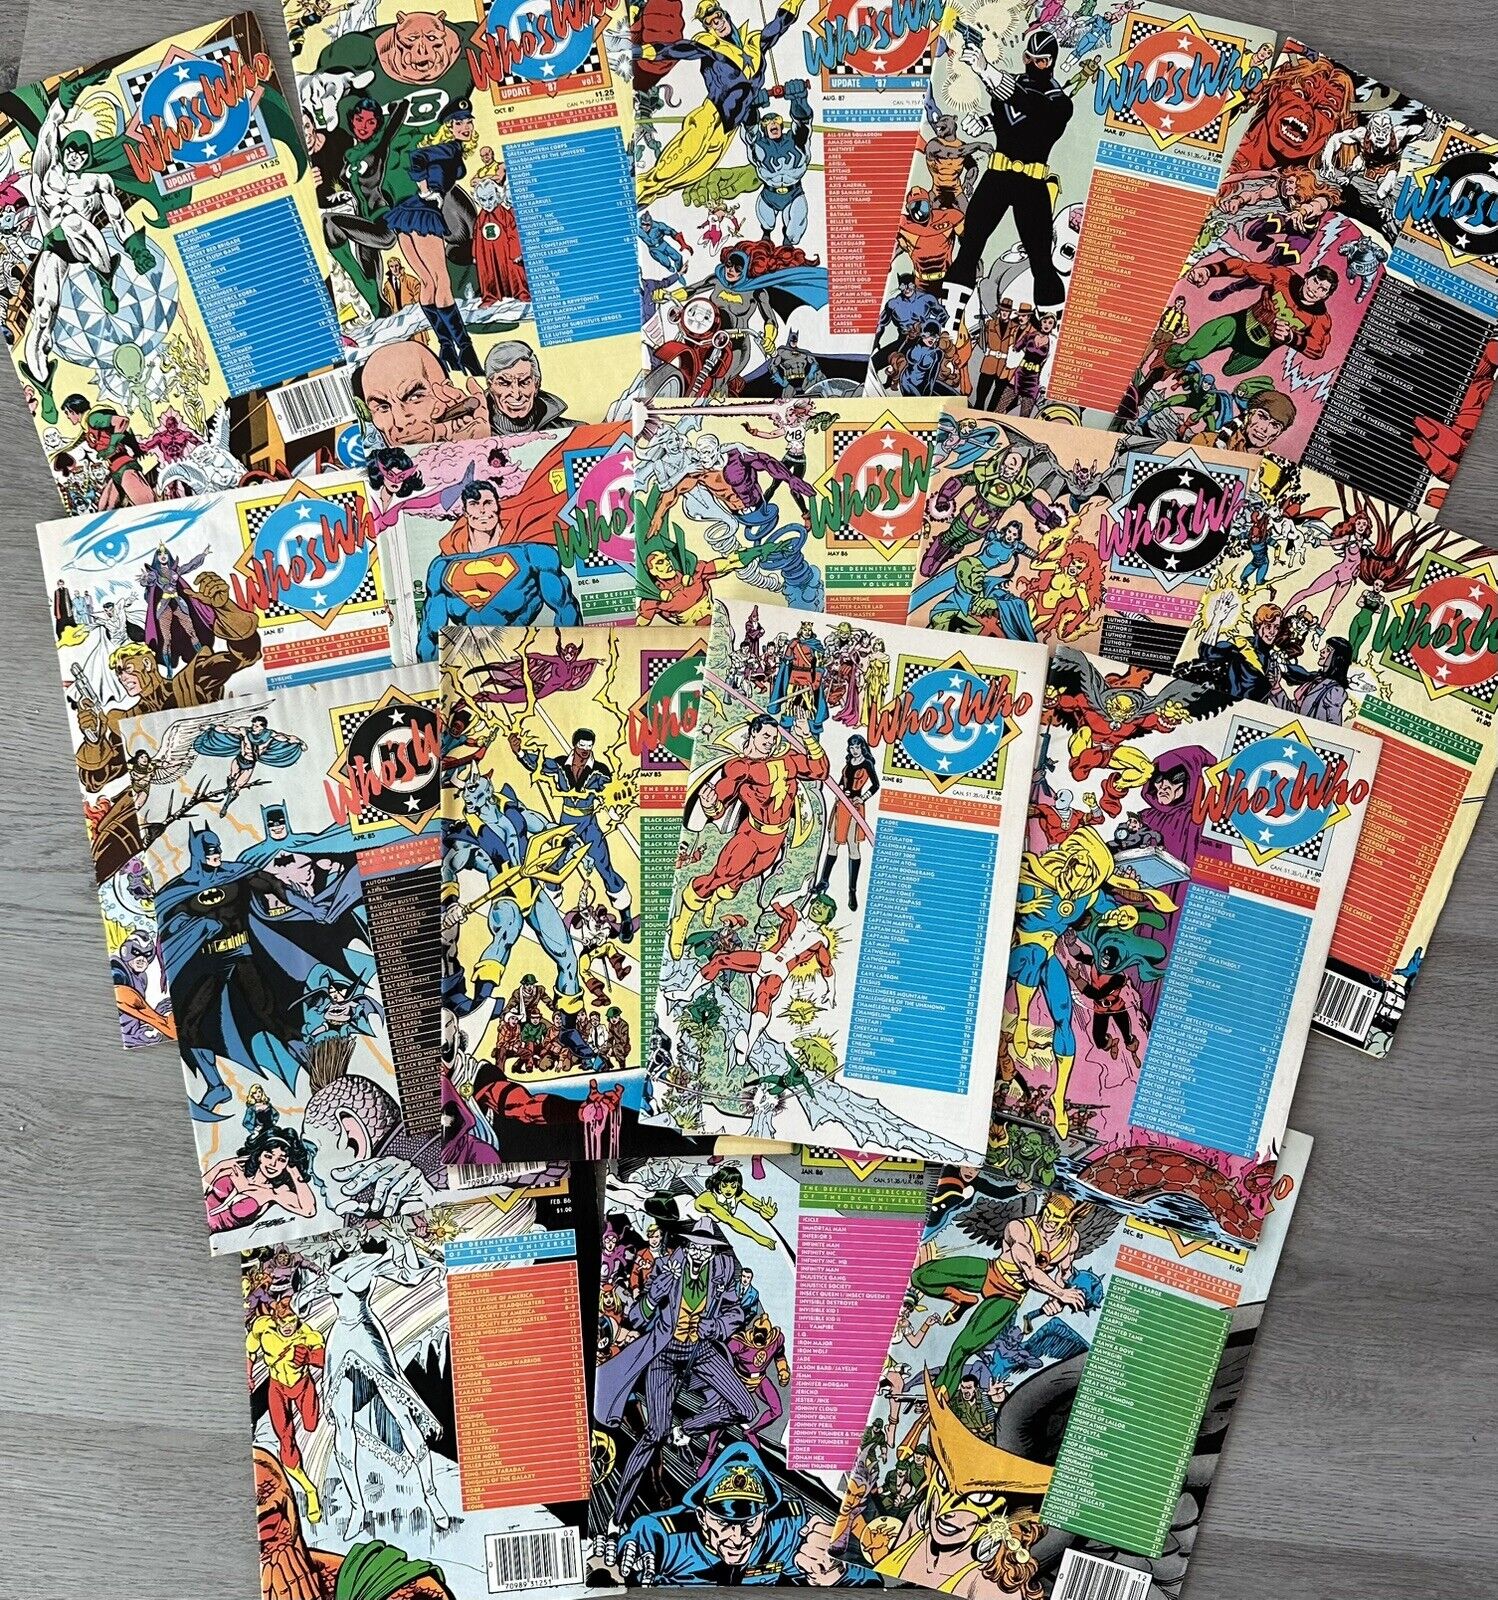 DC Comics Who's Who (1985-87) Grab Bag, 17 Issues Including #4 (Dave Stevens)